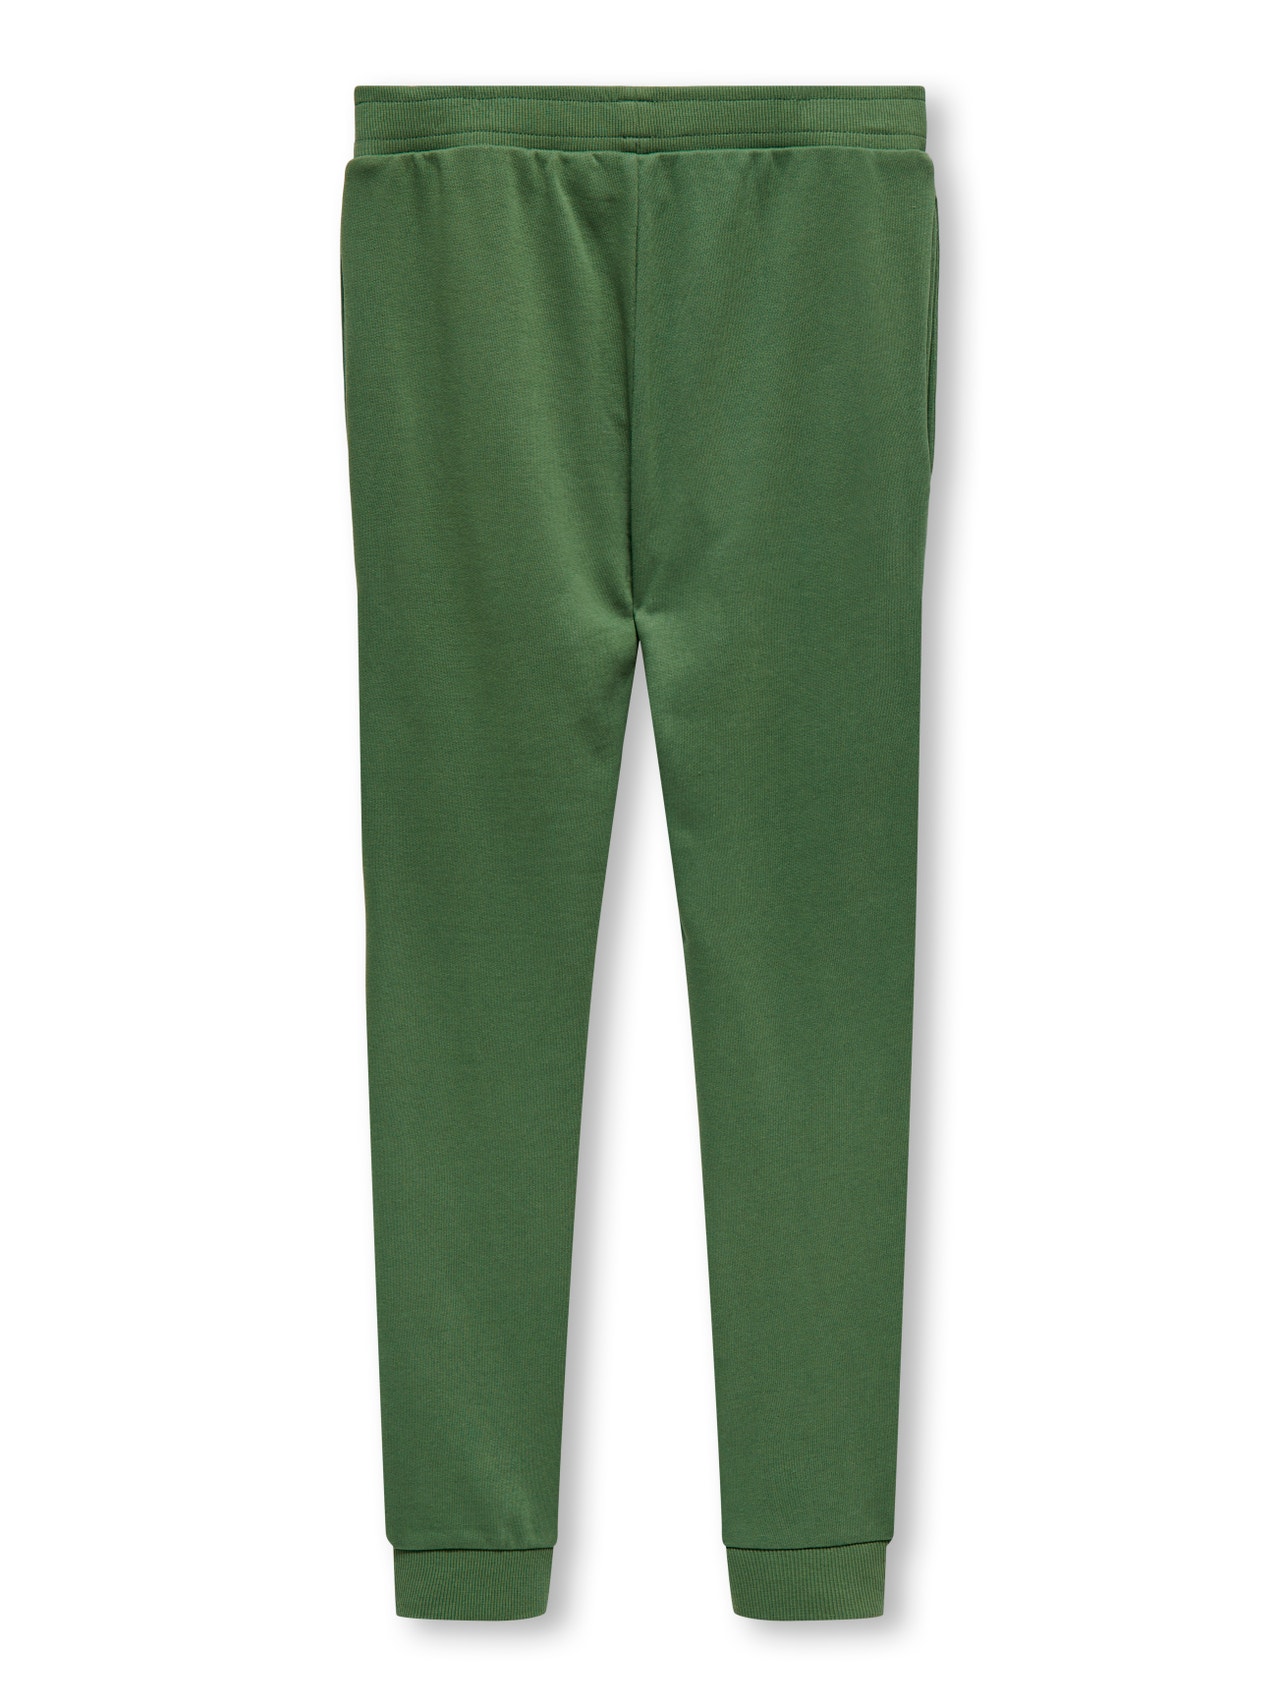 ONLY Pantalones Corte tapered -Myrtle - 15314134